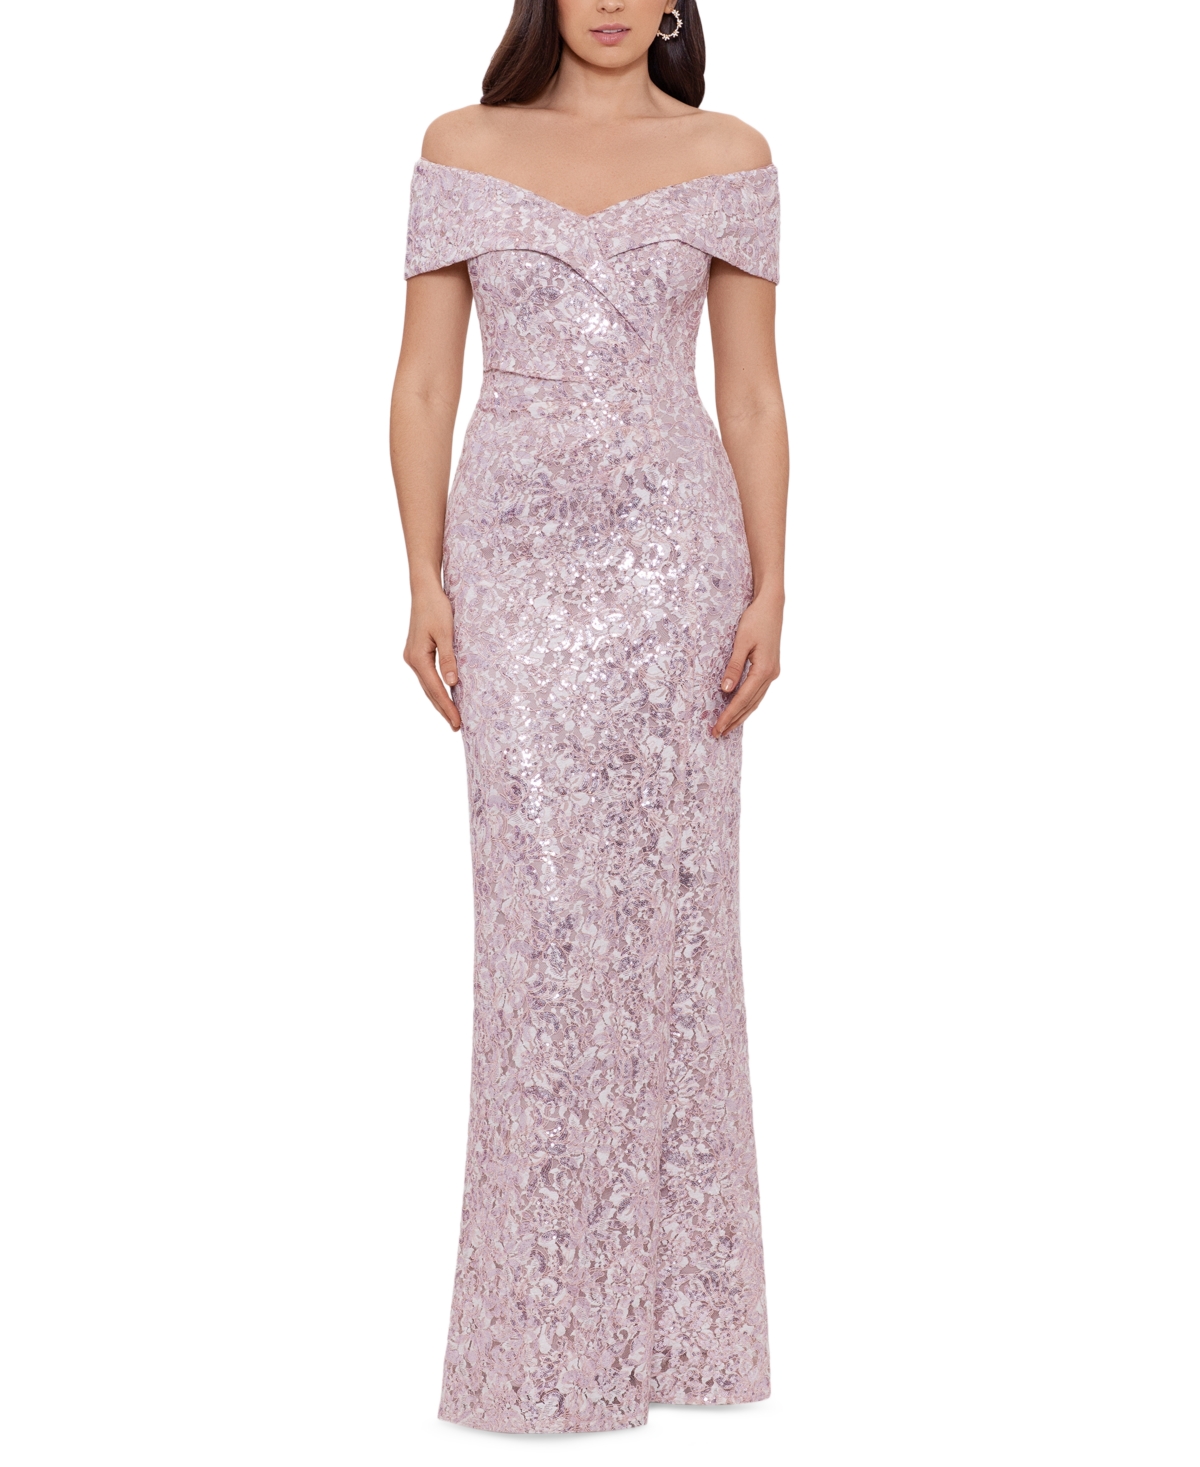 XSCAPE WOMEN'S SEQUINED LACE OFF-THE-SHOULDER GOWN